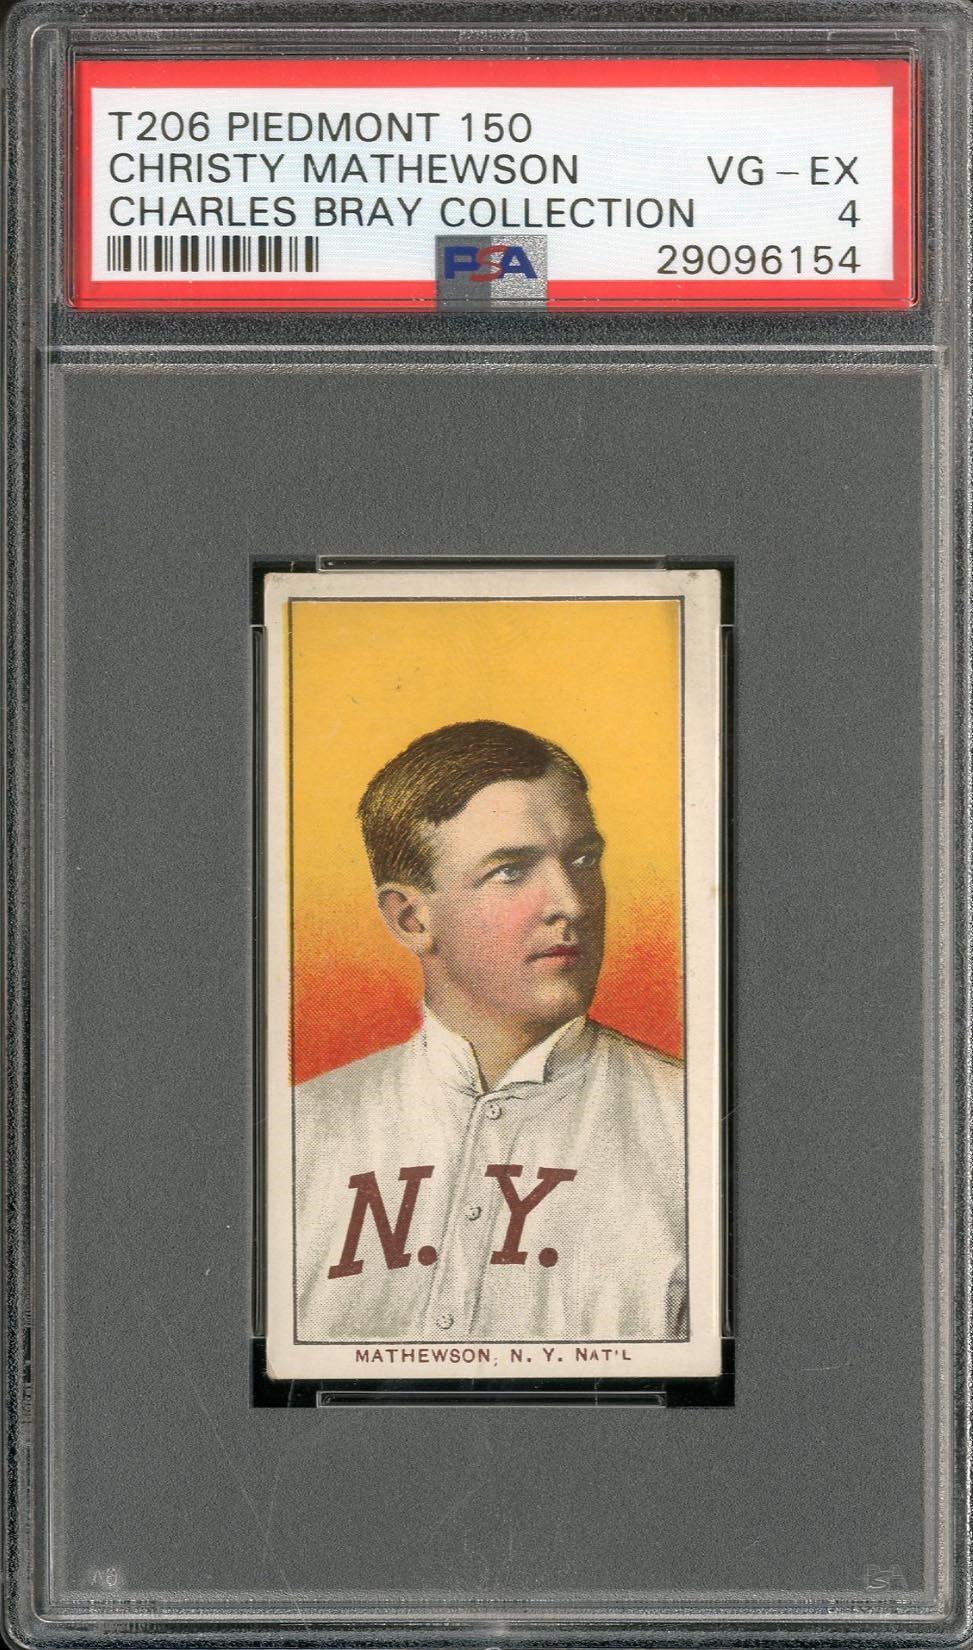 Baseball and Trading Cards - T206 Christy Mathewson Portrait PSA VG-EX 4 - The Charles Bray Collection